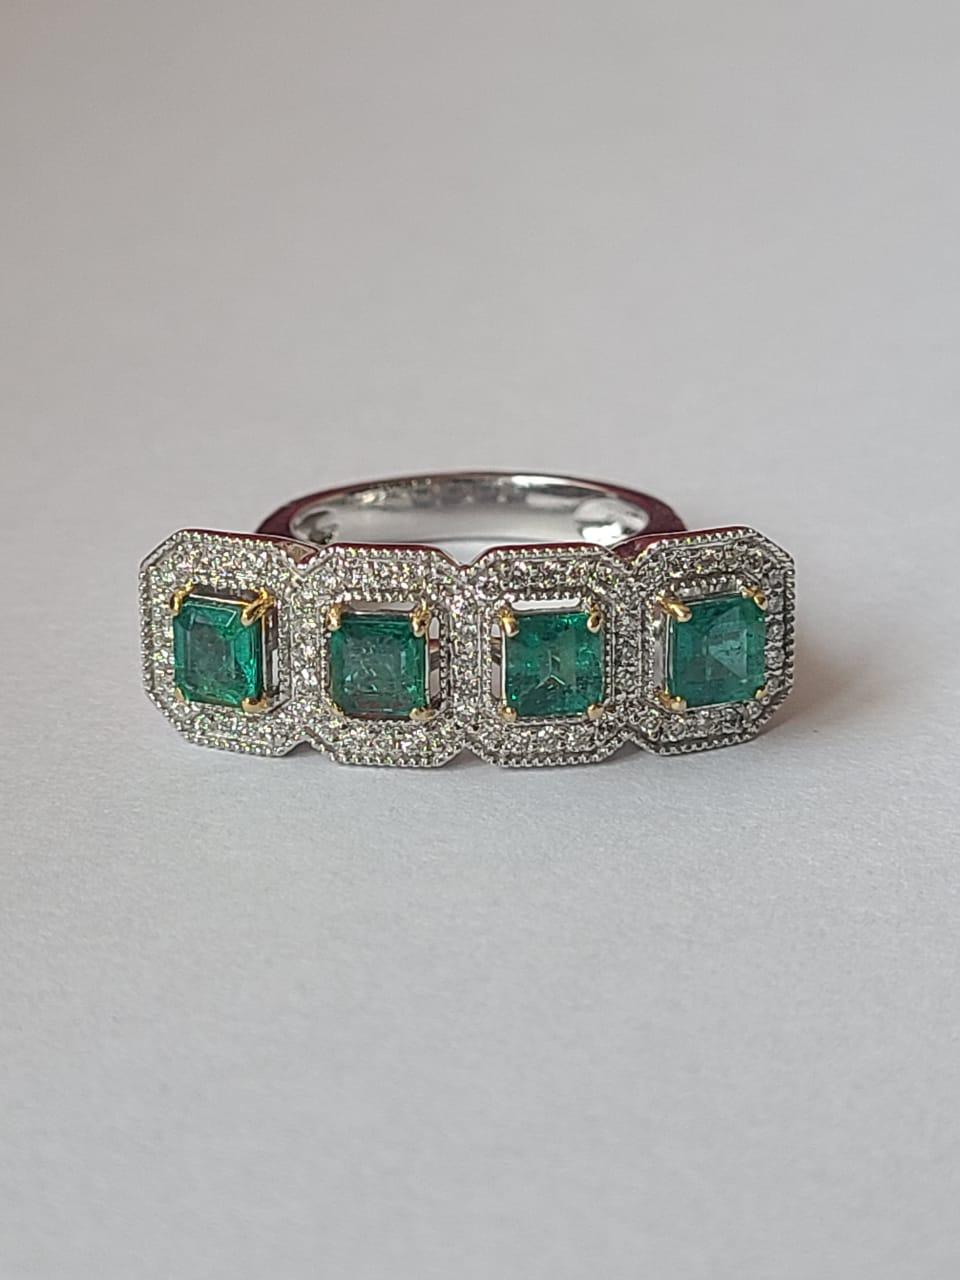 A very beautiful and one of a kind, Emerald Cocktail Ring set in 18K White Gold & Diamonds. The weight of the Emerald Squares is 1.56 carats. The weight of the Diamonds is 0.45 carats. Net Gold weight is 10.73 grams. The dimensions of the ring are